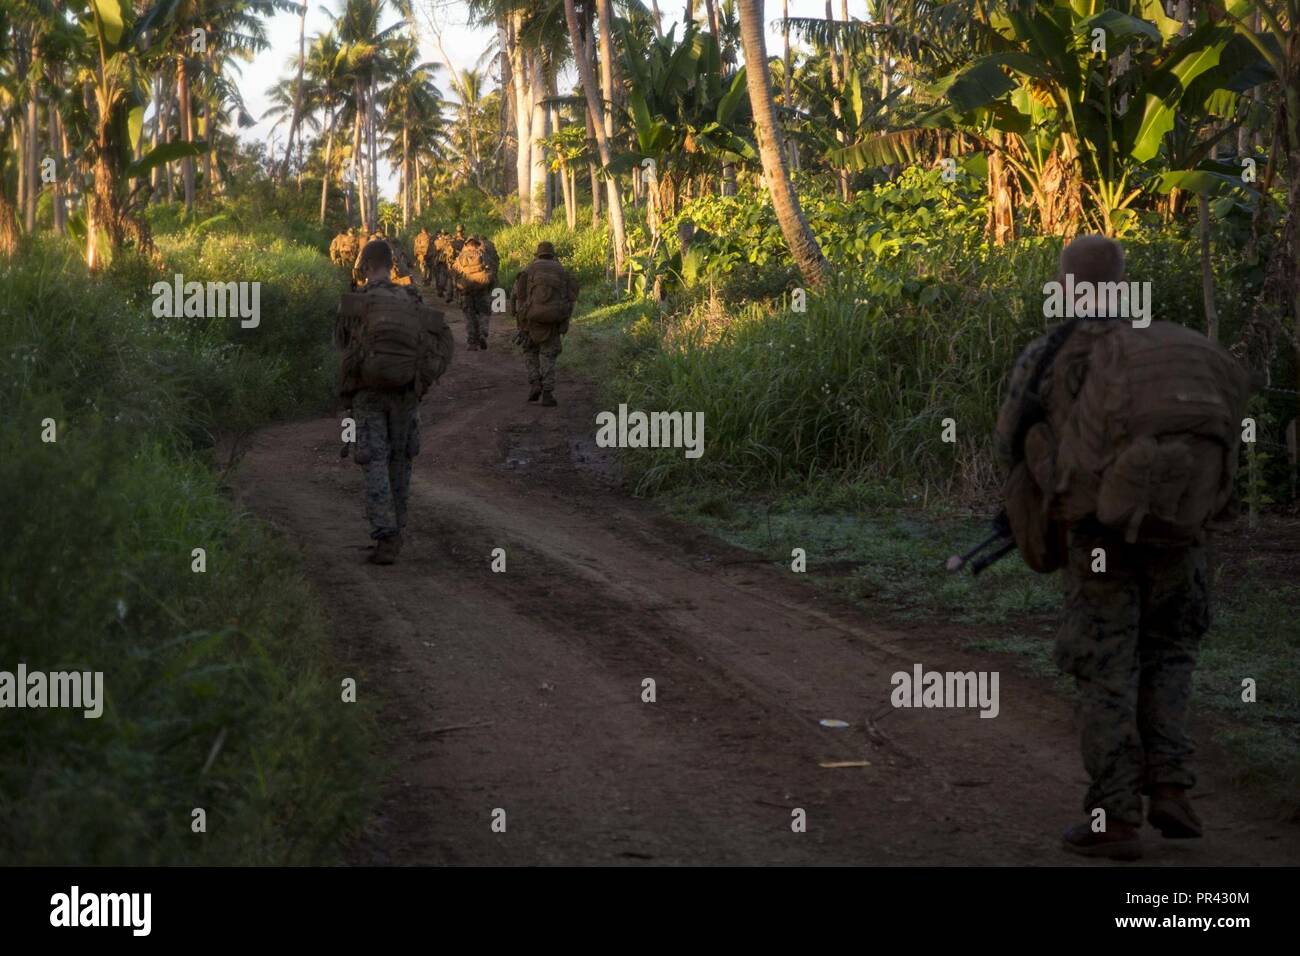 U.S. Marines with 3rd Battalion 4th Marines attached to Task Force Koa Moana 17 move to an objective during a joint service infantry training exercise as a part of Exercise TAFAKULA on Vava’u Island, Tonga, July 26, 2017. Exercise TAFAKULA is designed to strengthen the military-to-military, and community relations between Tonga’s His Majesty’s Armed Forces, French Army of New Caledonia, New Zealand Defense Force, and the United States Armed Forces. Stock Photo